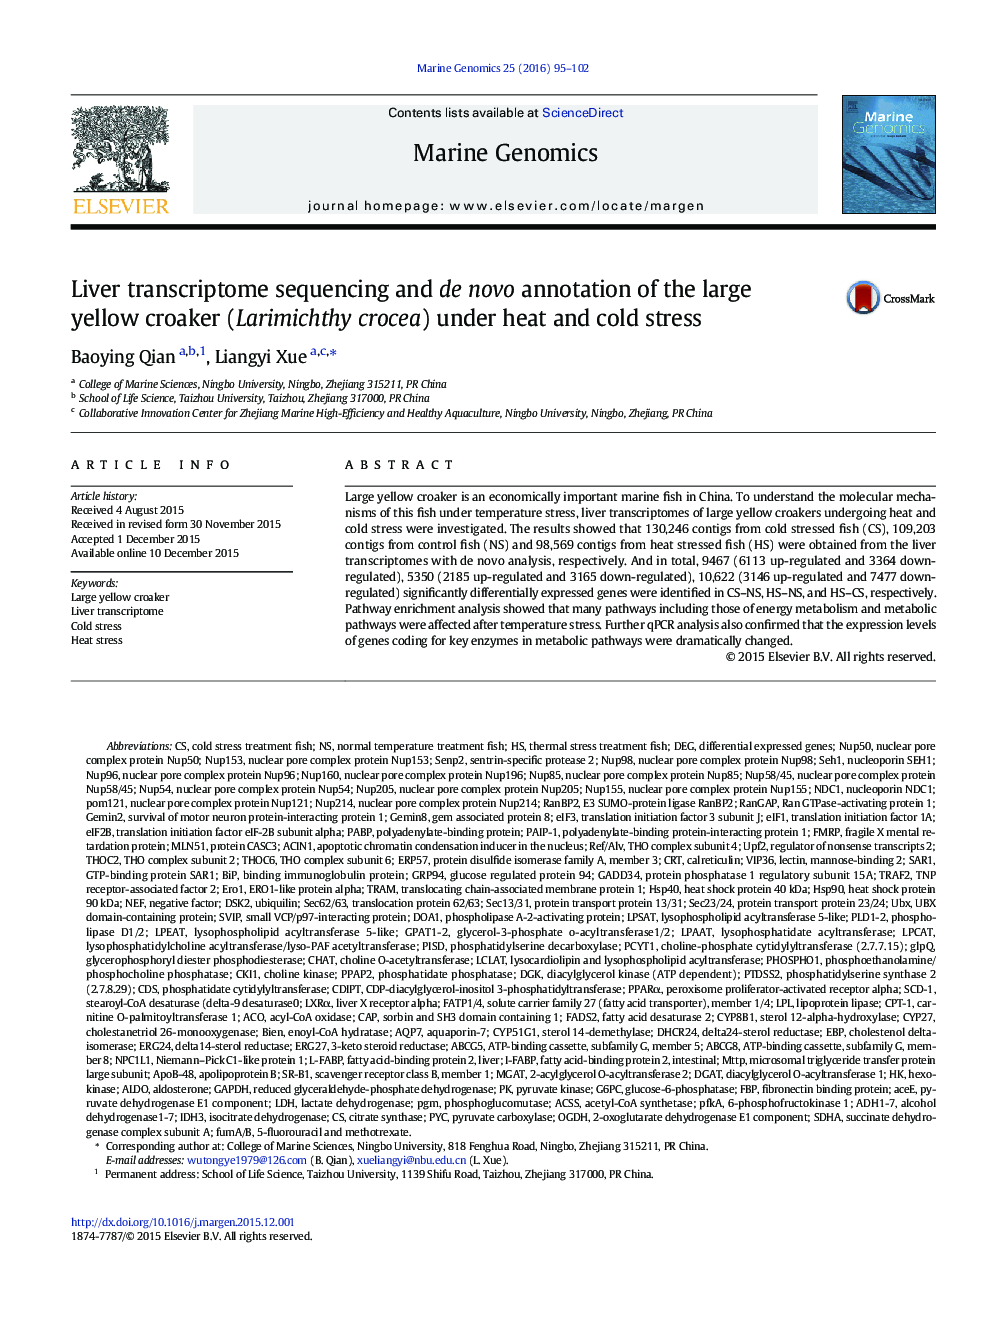 Liver transcriptome sequencing and de novo annotation of the large yellow croaker (Larimichthy crocea) under heat and cold stress